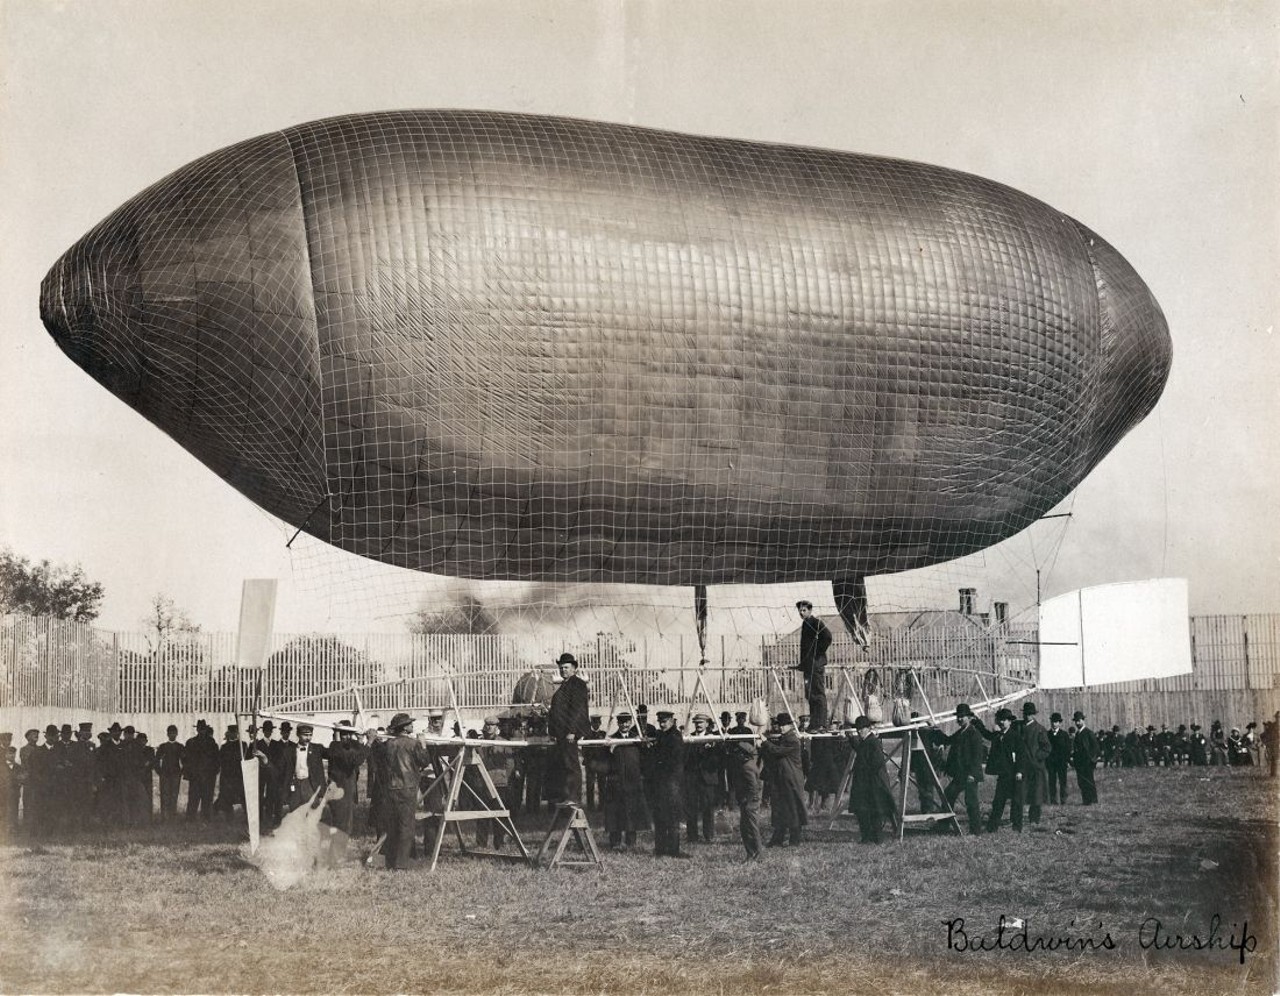 "BALDWIN'S AIRSHIP." (SHIP READY FOR TAKEOFF WITH ROY KNABENSHUE STANDING ON THE FRAME. DEPARTMENT OF TRANSPORTATION EXHIBIT AT THE 1904 WORLD'S FAIR).
Find out more about this photo at MoHistory.org.